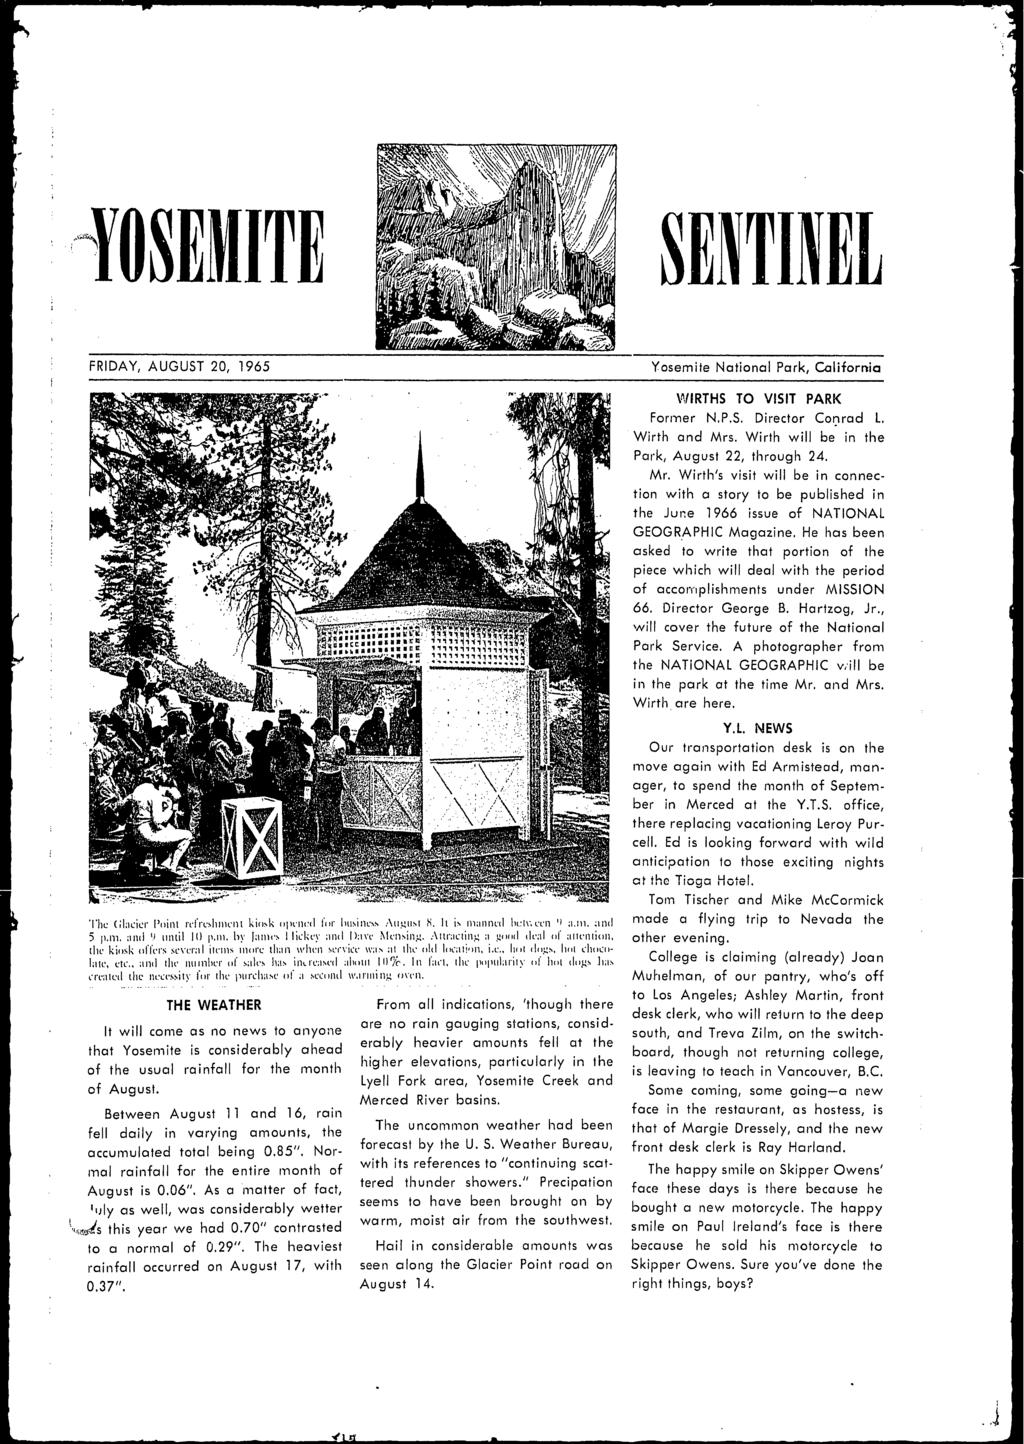 SENTINEL FRIDAY, AUGUST 20, 1965 Yosemte Natonal Park, Calforna THE WEATHER It wll come as no news to anyone that Yosemte s consderably ahead of the usual ranfall for the r nonth of August.